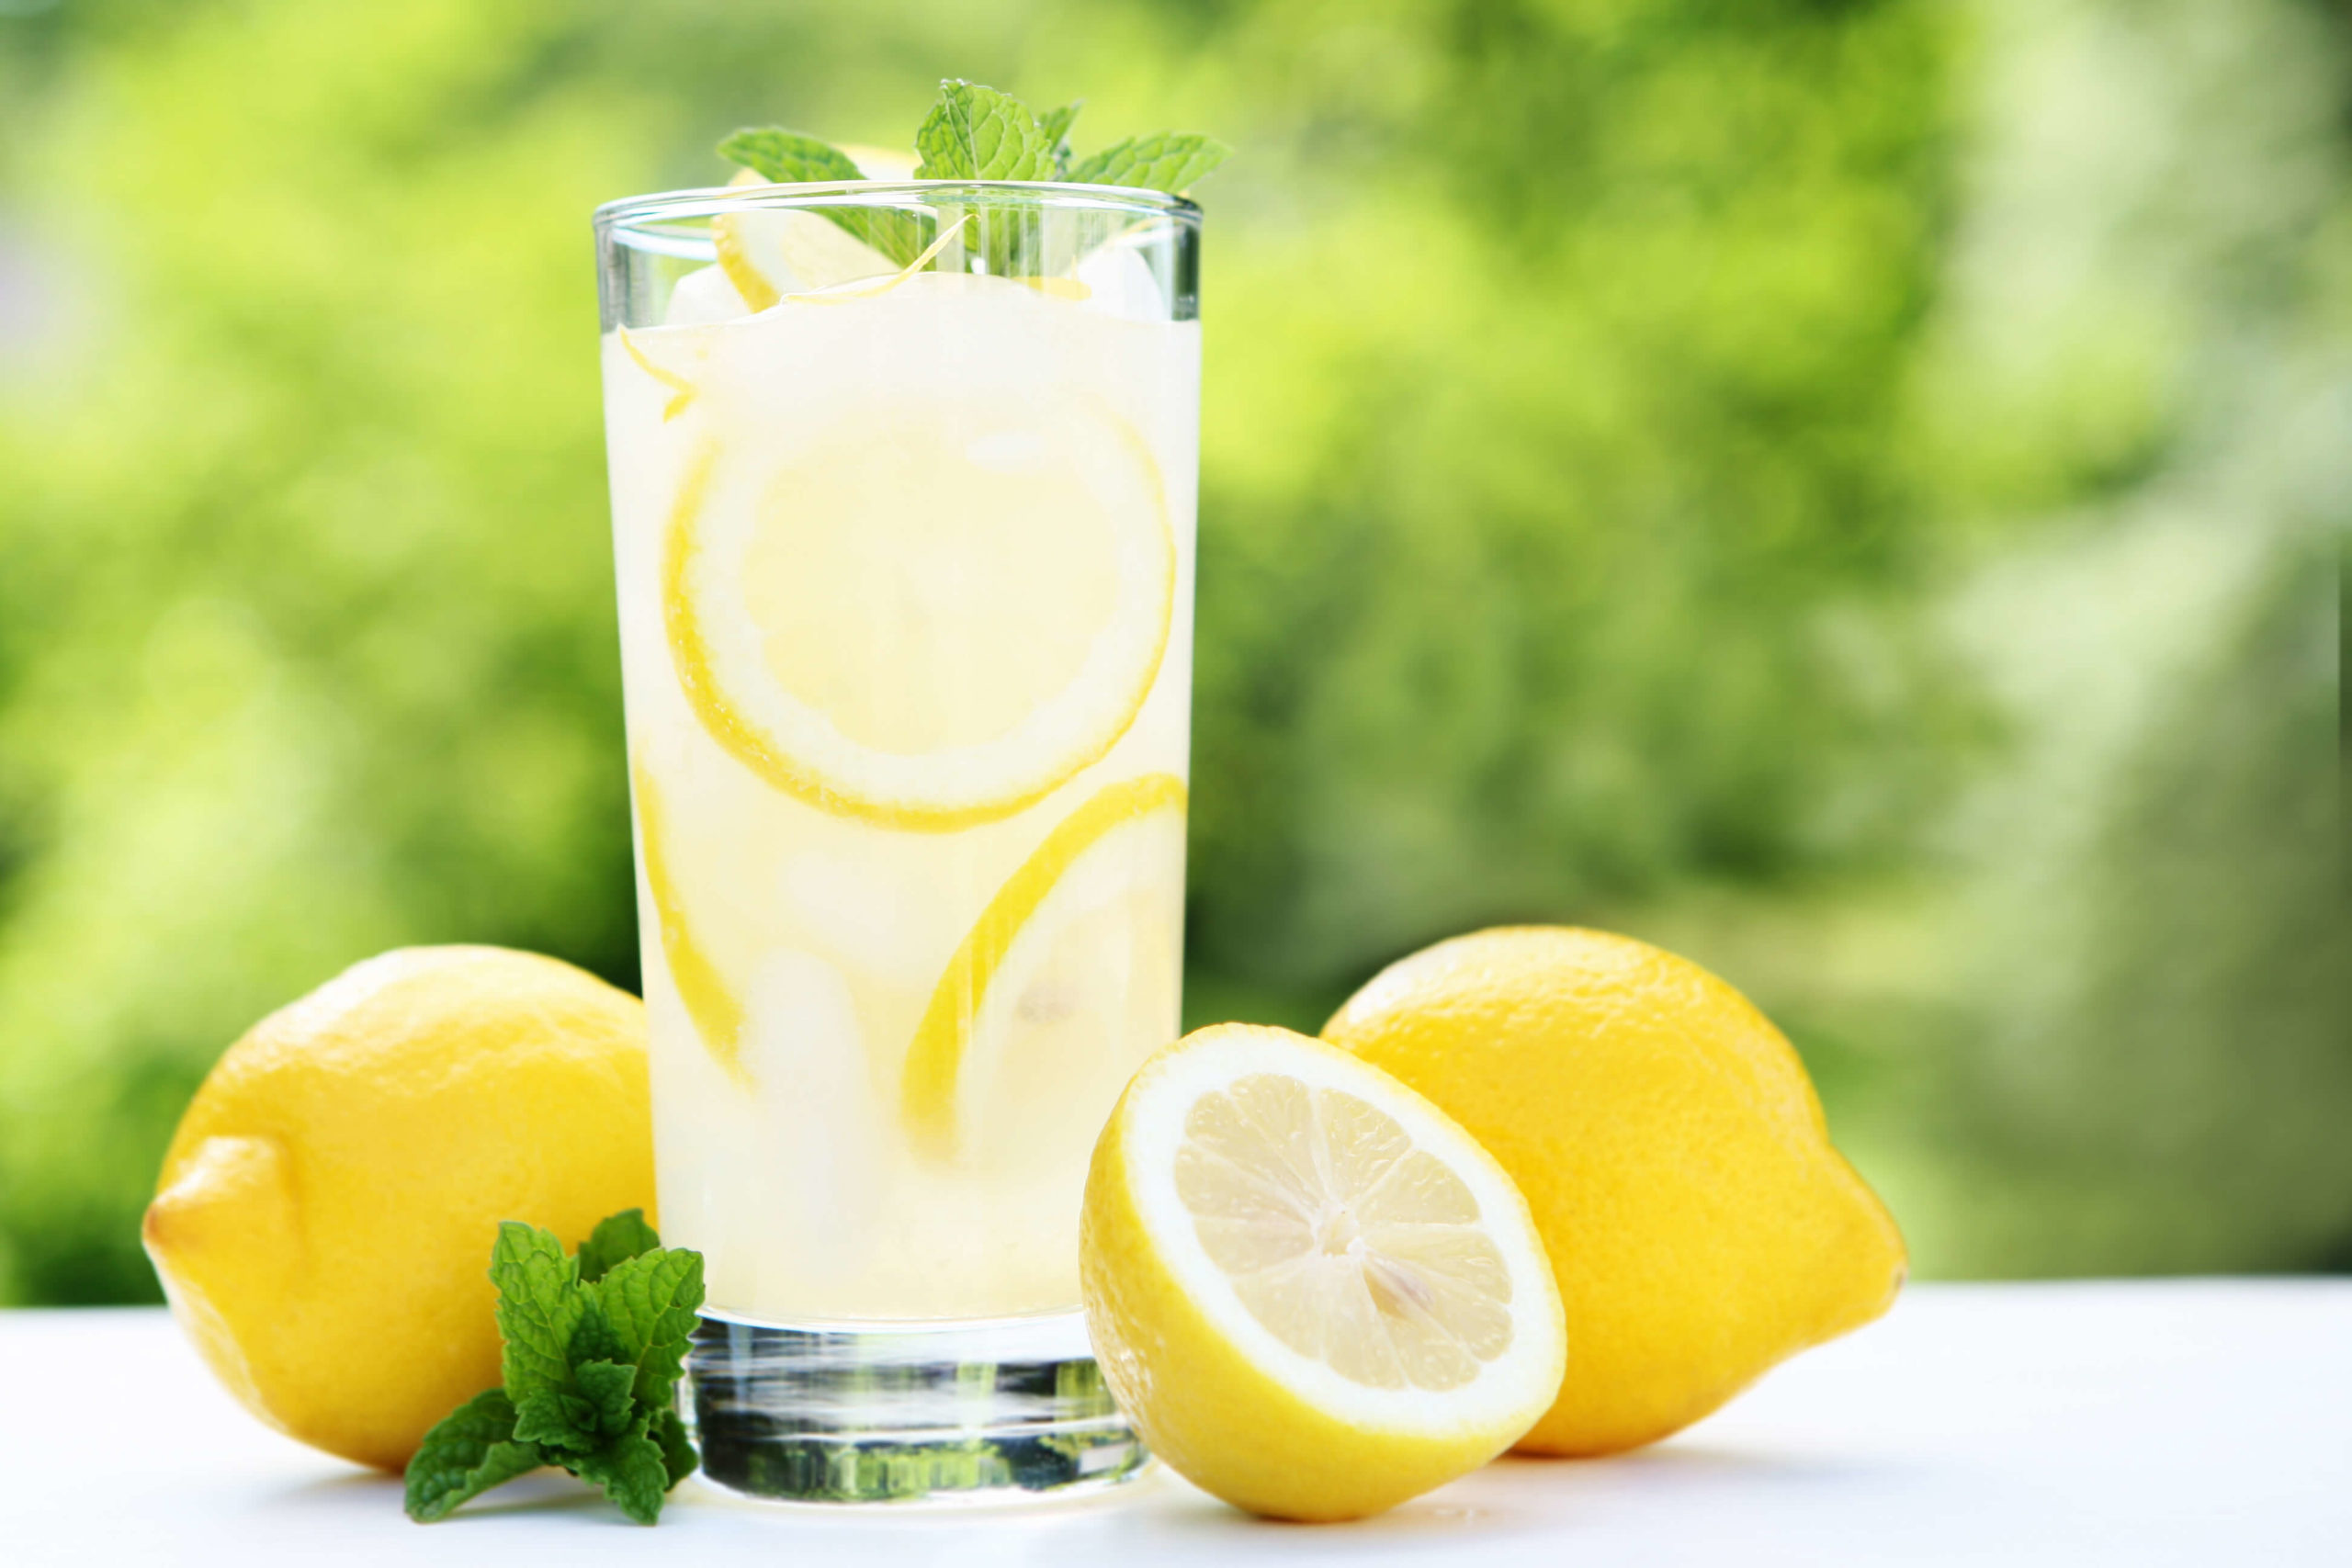 Lemonade: Homemade beverage made from freshly squeezed fruits. 2560x1710 HD Wallpaper.